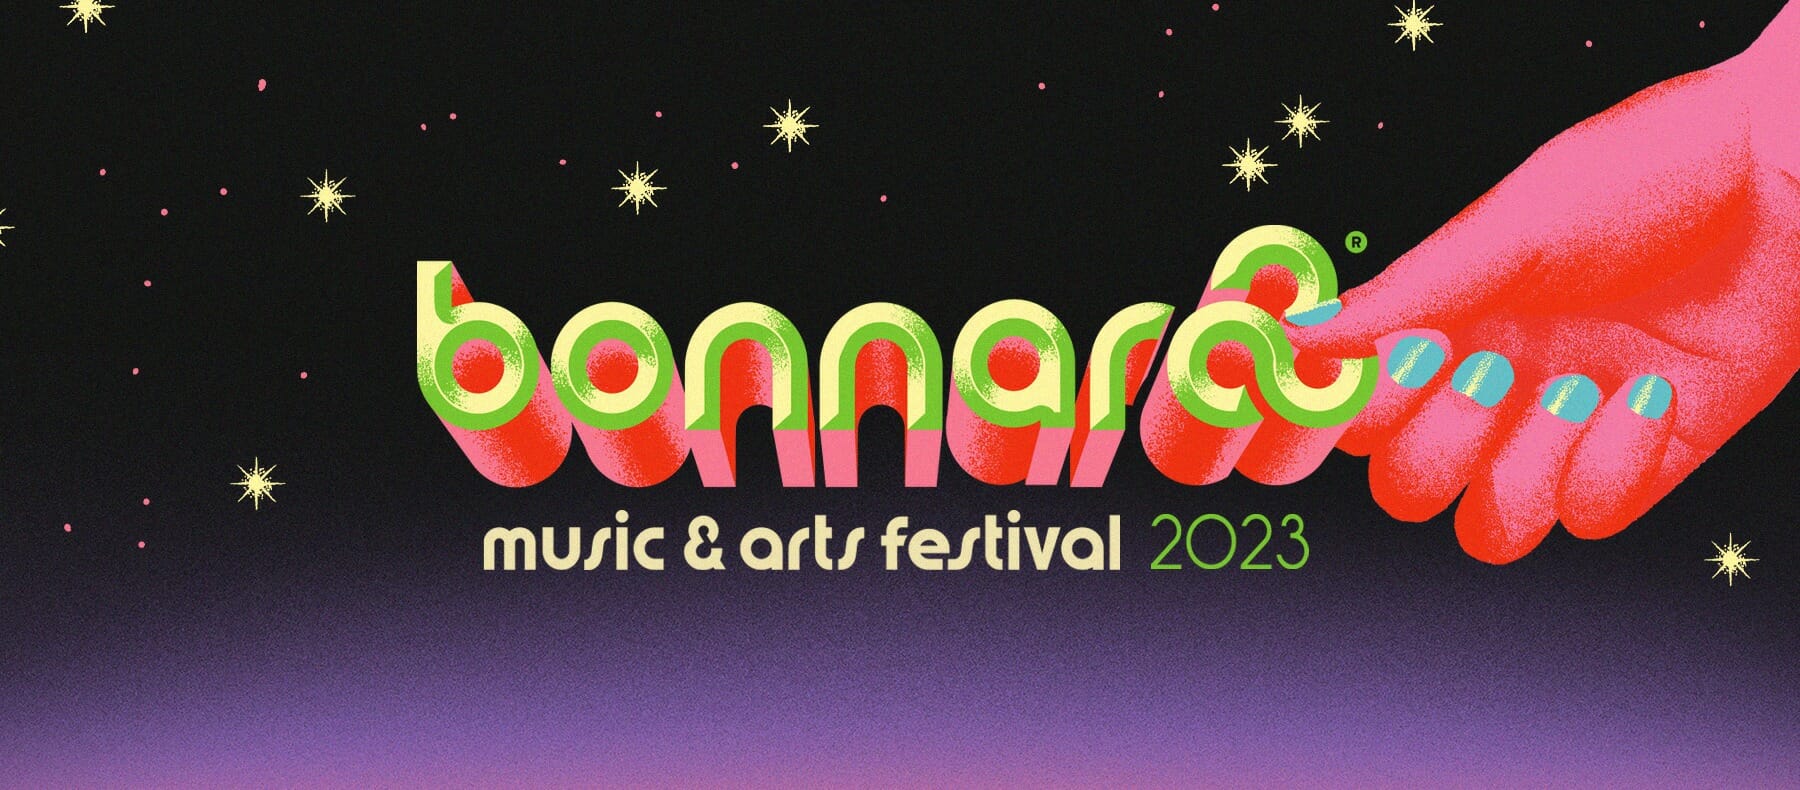 Bonnaroo Music and Arts Festival Unveils 2023 Lineup: Foo Fighters, Odesza, Kendrick Lamar and More